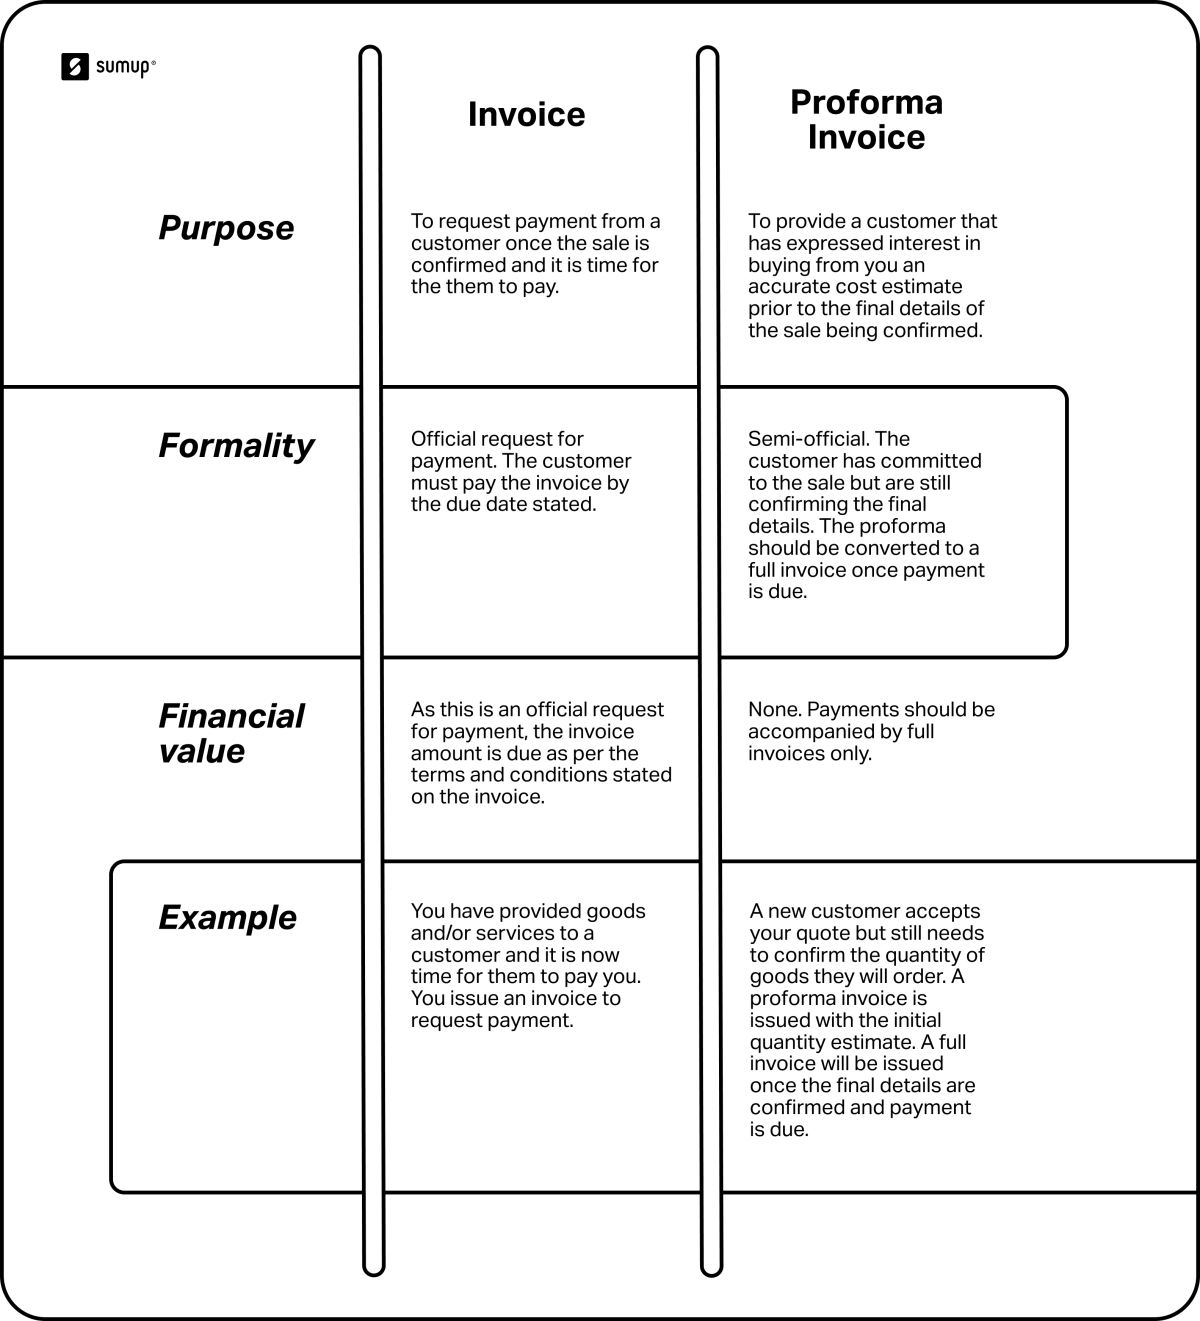 A chart showing the differences between an invoice and a proforma invoice in terms of purpose, formality, and financial value.